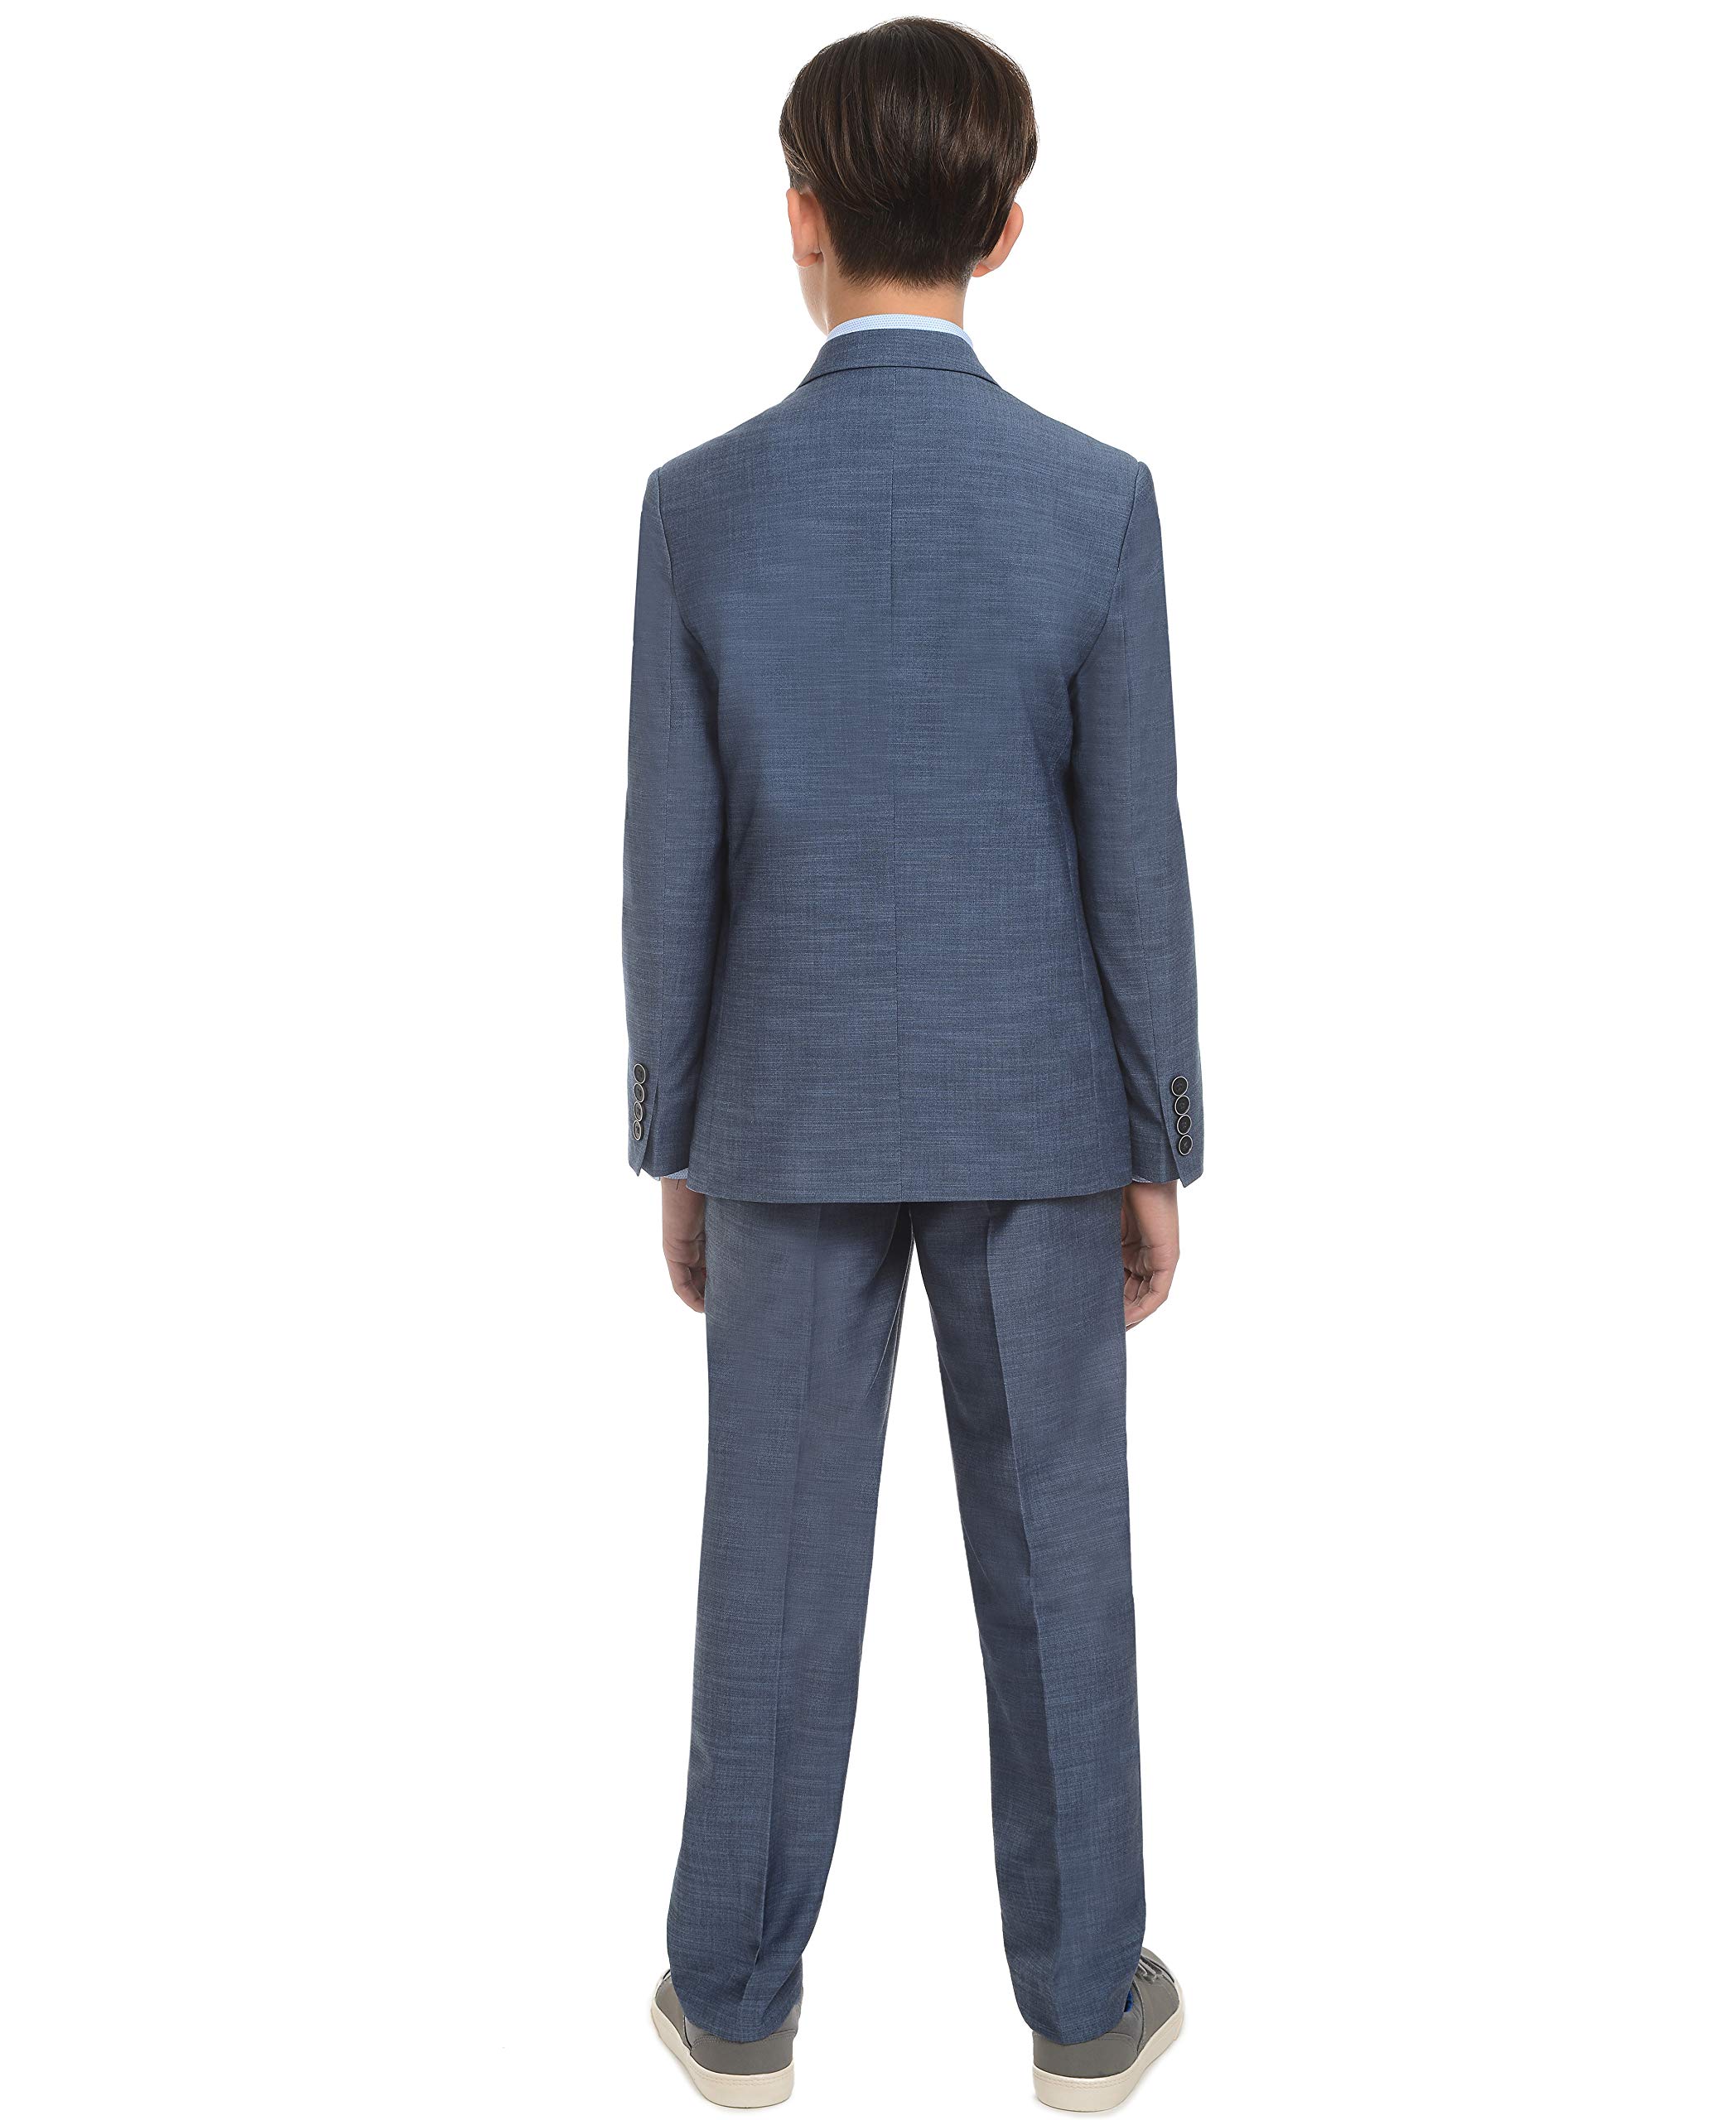 Calvin Klein Boys' Blazer Suit Jacket, 2-Button Single Breasted Closure, Buttoned Cuffs & Front Flap Pockets